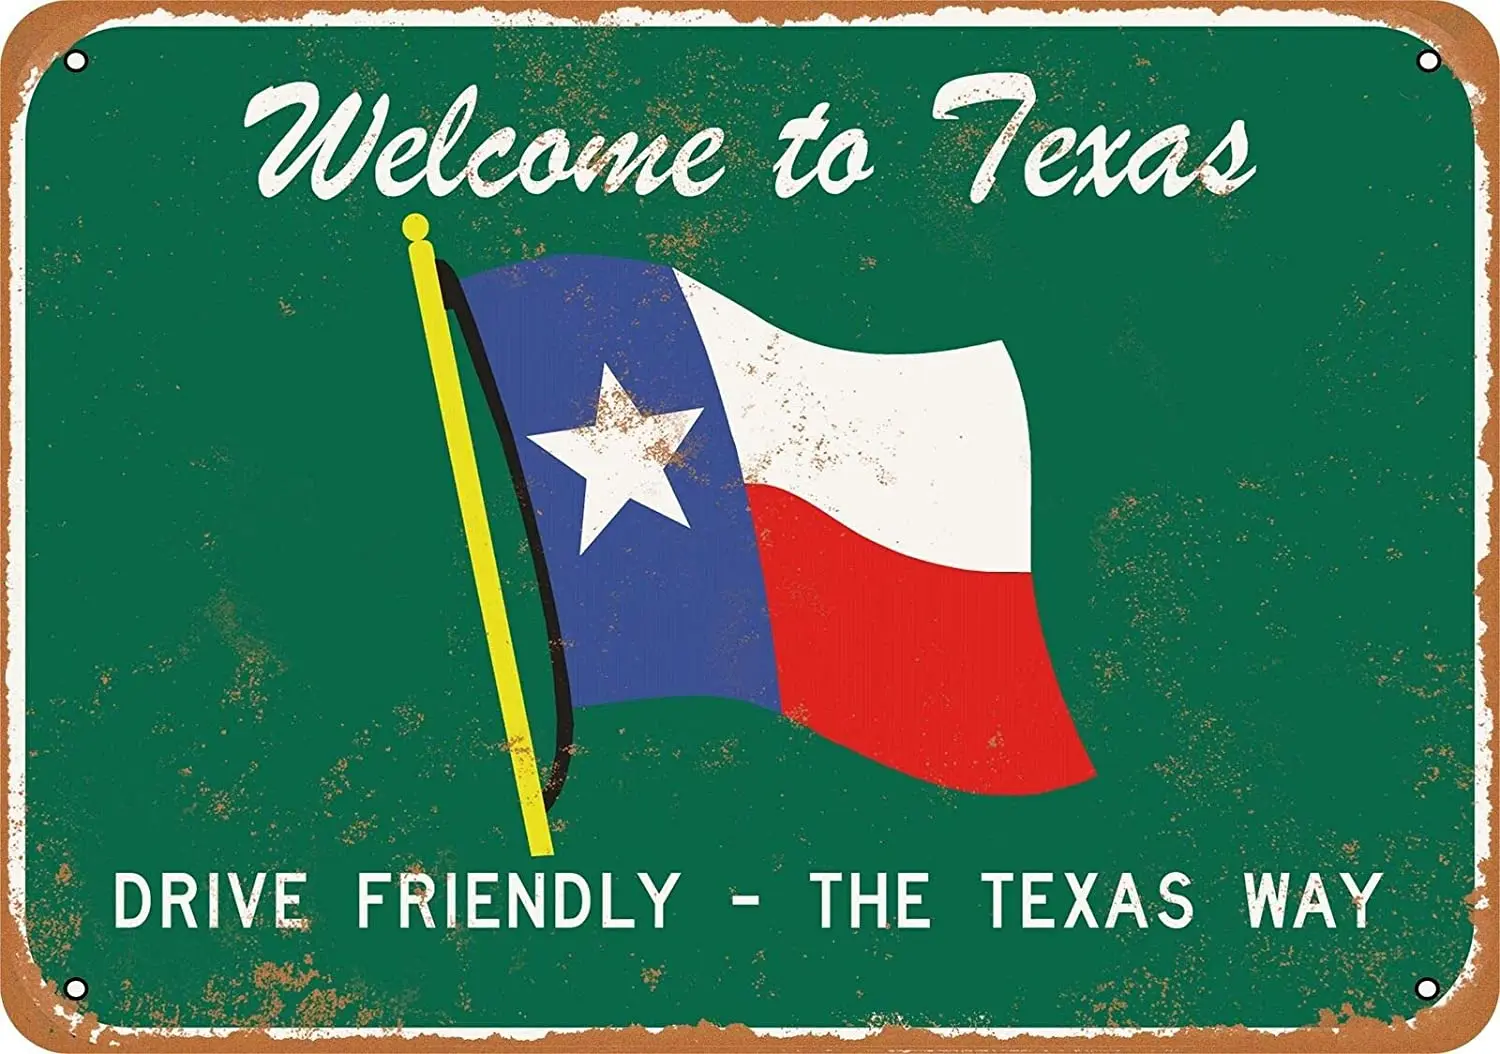 

Vintage Metal Tin Sign Welcome to Texas Drive Friendly for Home Bar Pub Kitchen Garage Restaurant Wall Deocr Plaque Signs